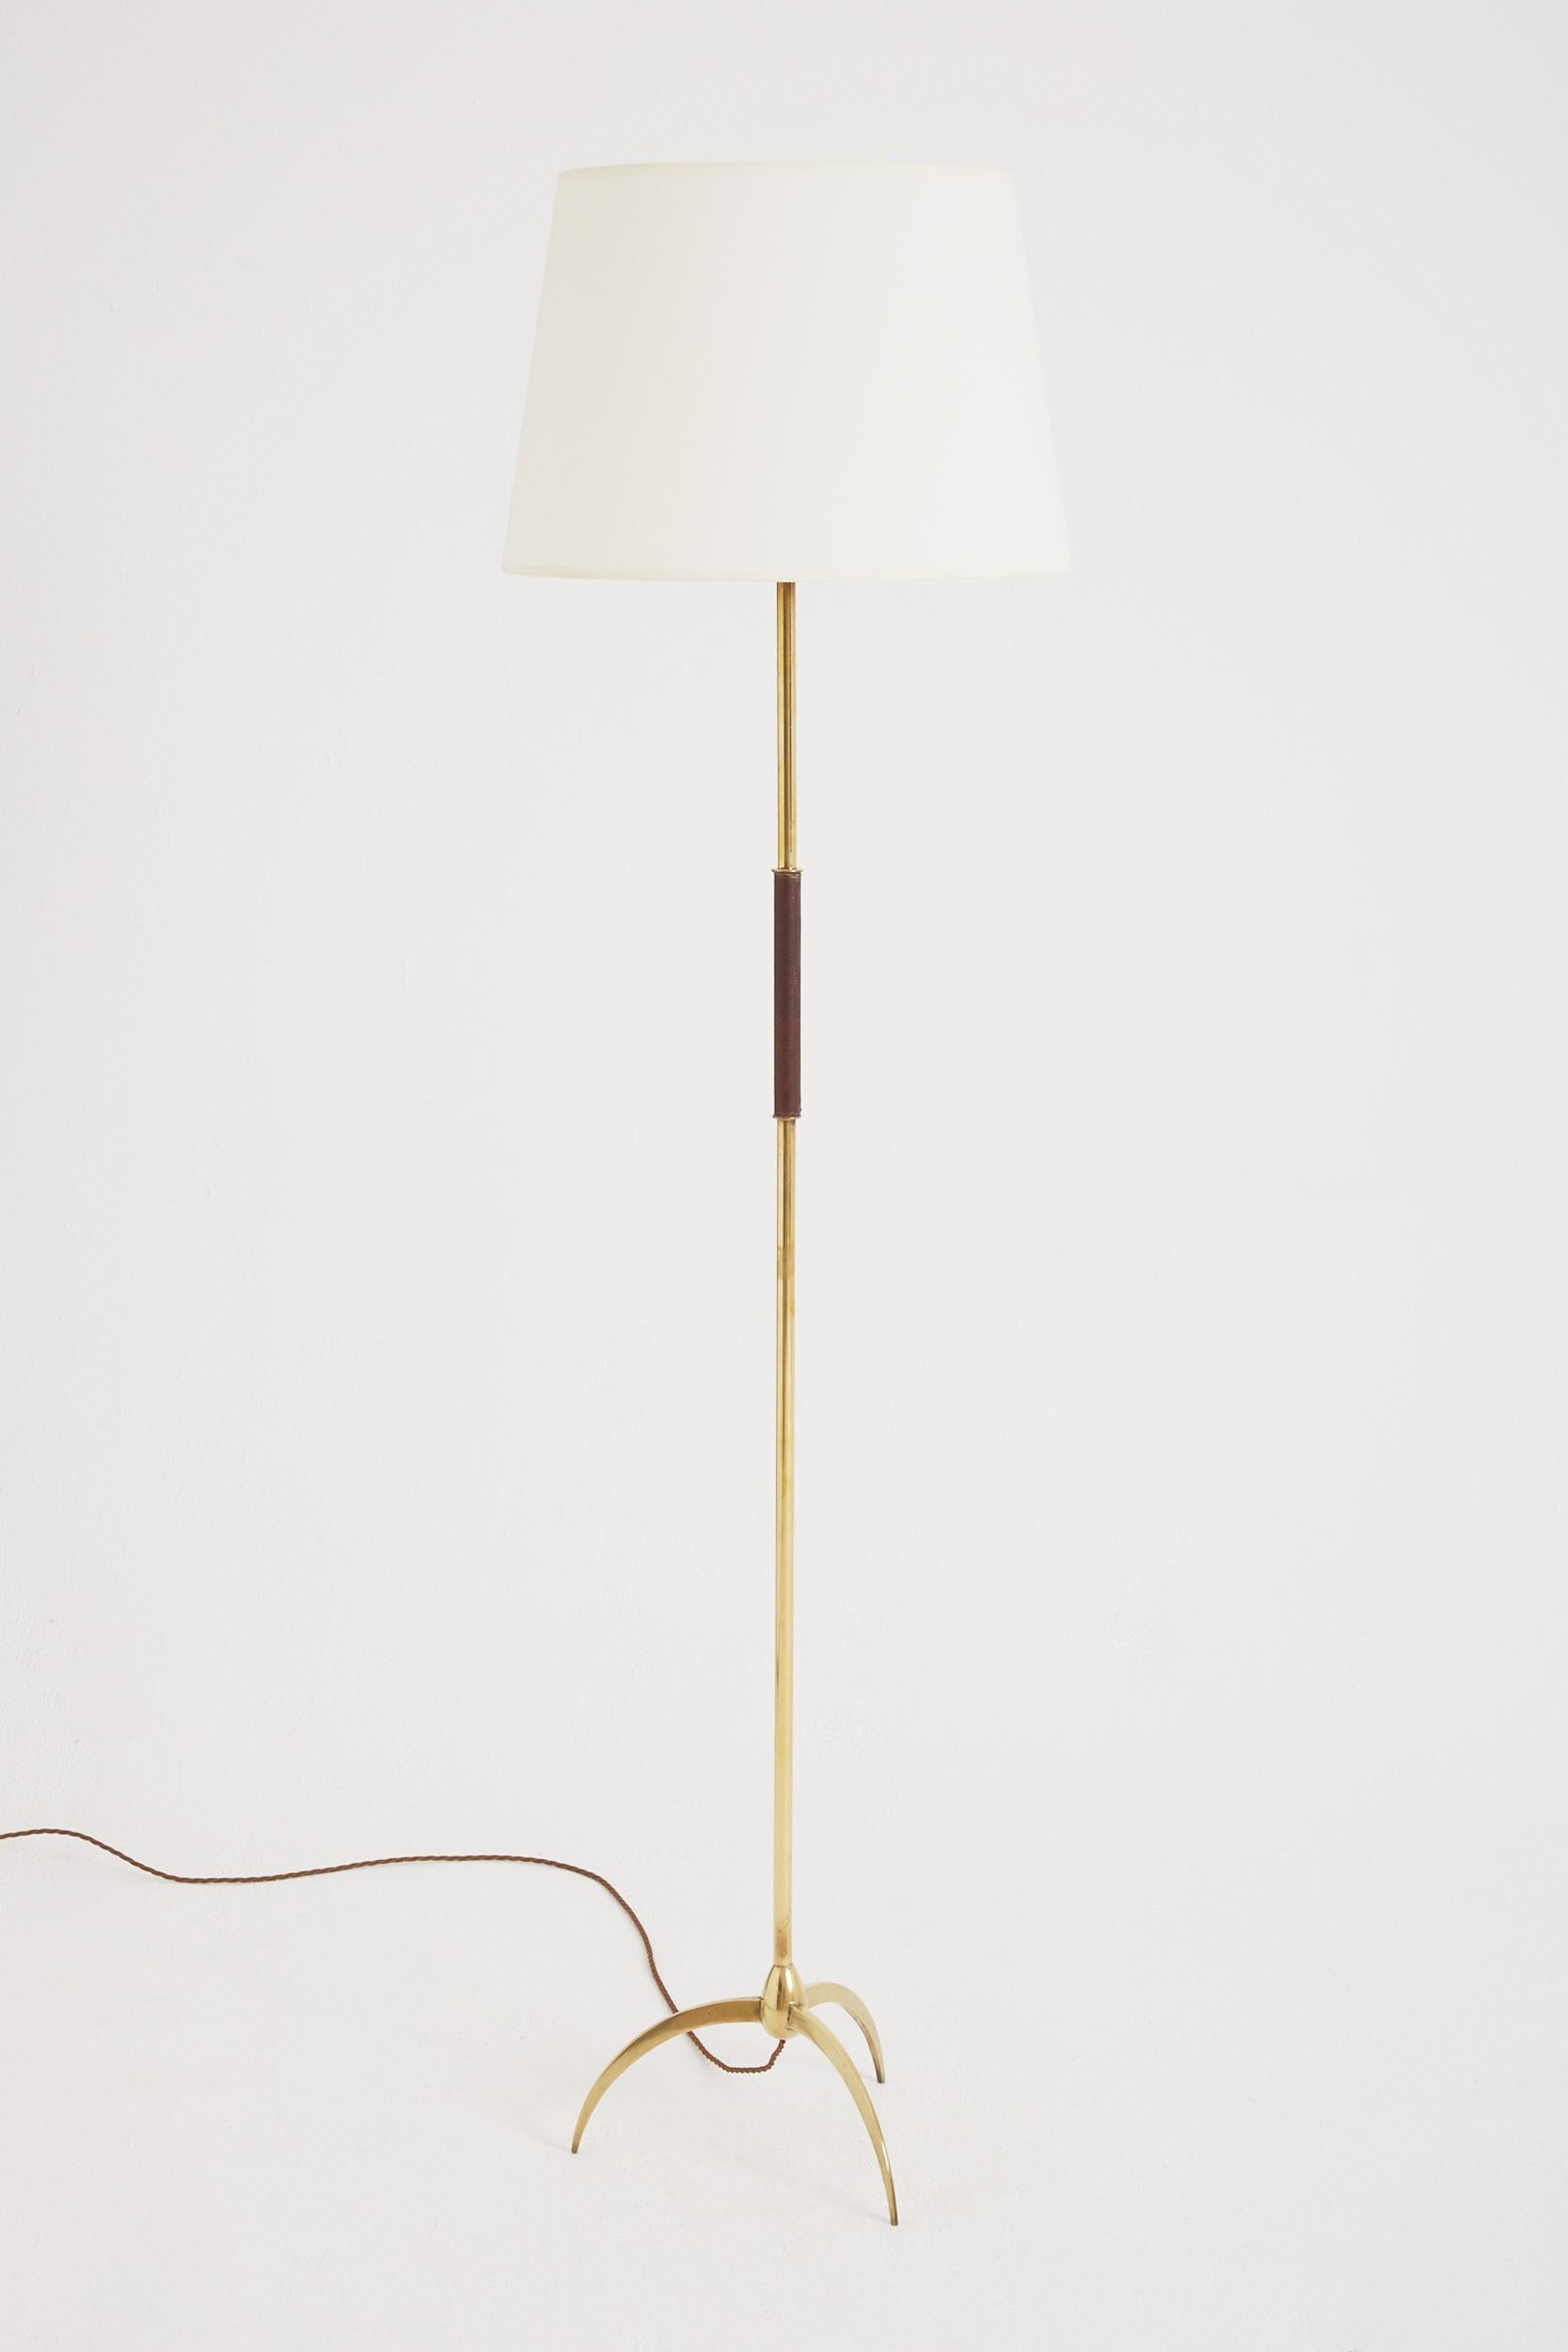 A brass tripod floor lamp, with a brown leather accent.
France, Circa 1950.